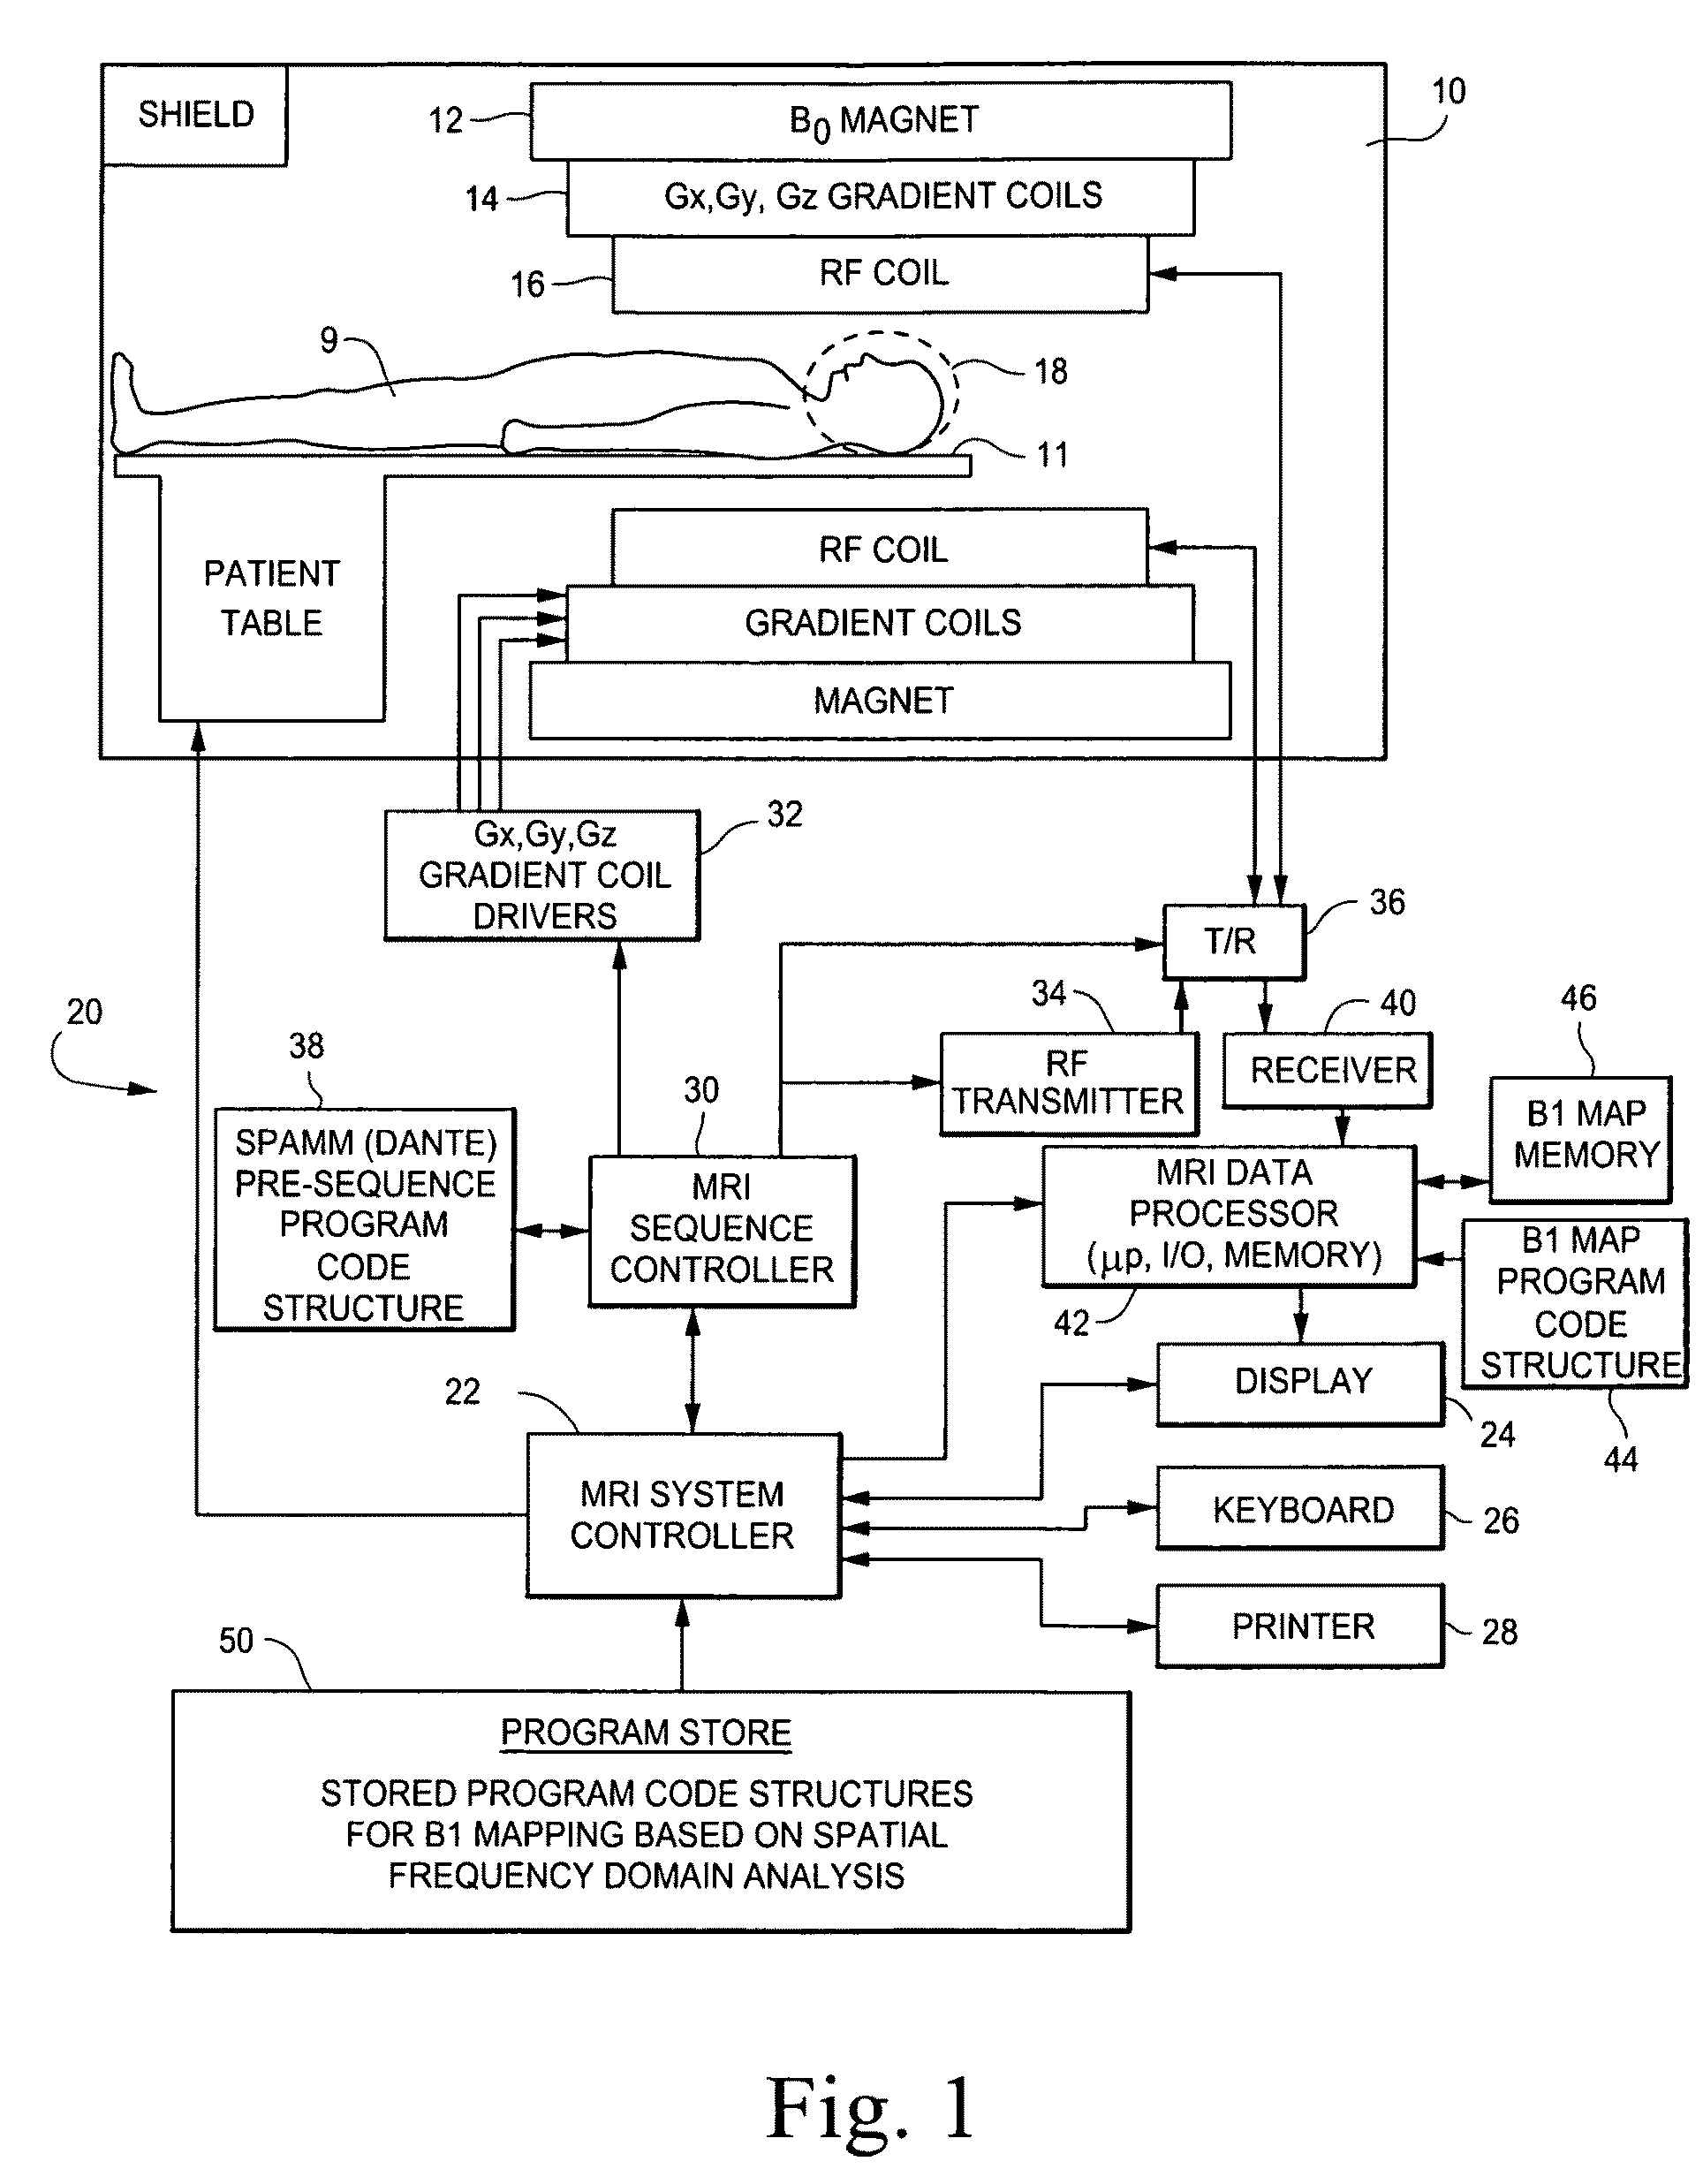 B1 mapping in MRI system using k-space spatial frequency domain filtering